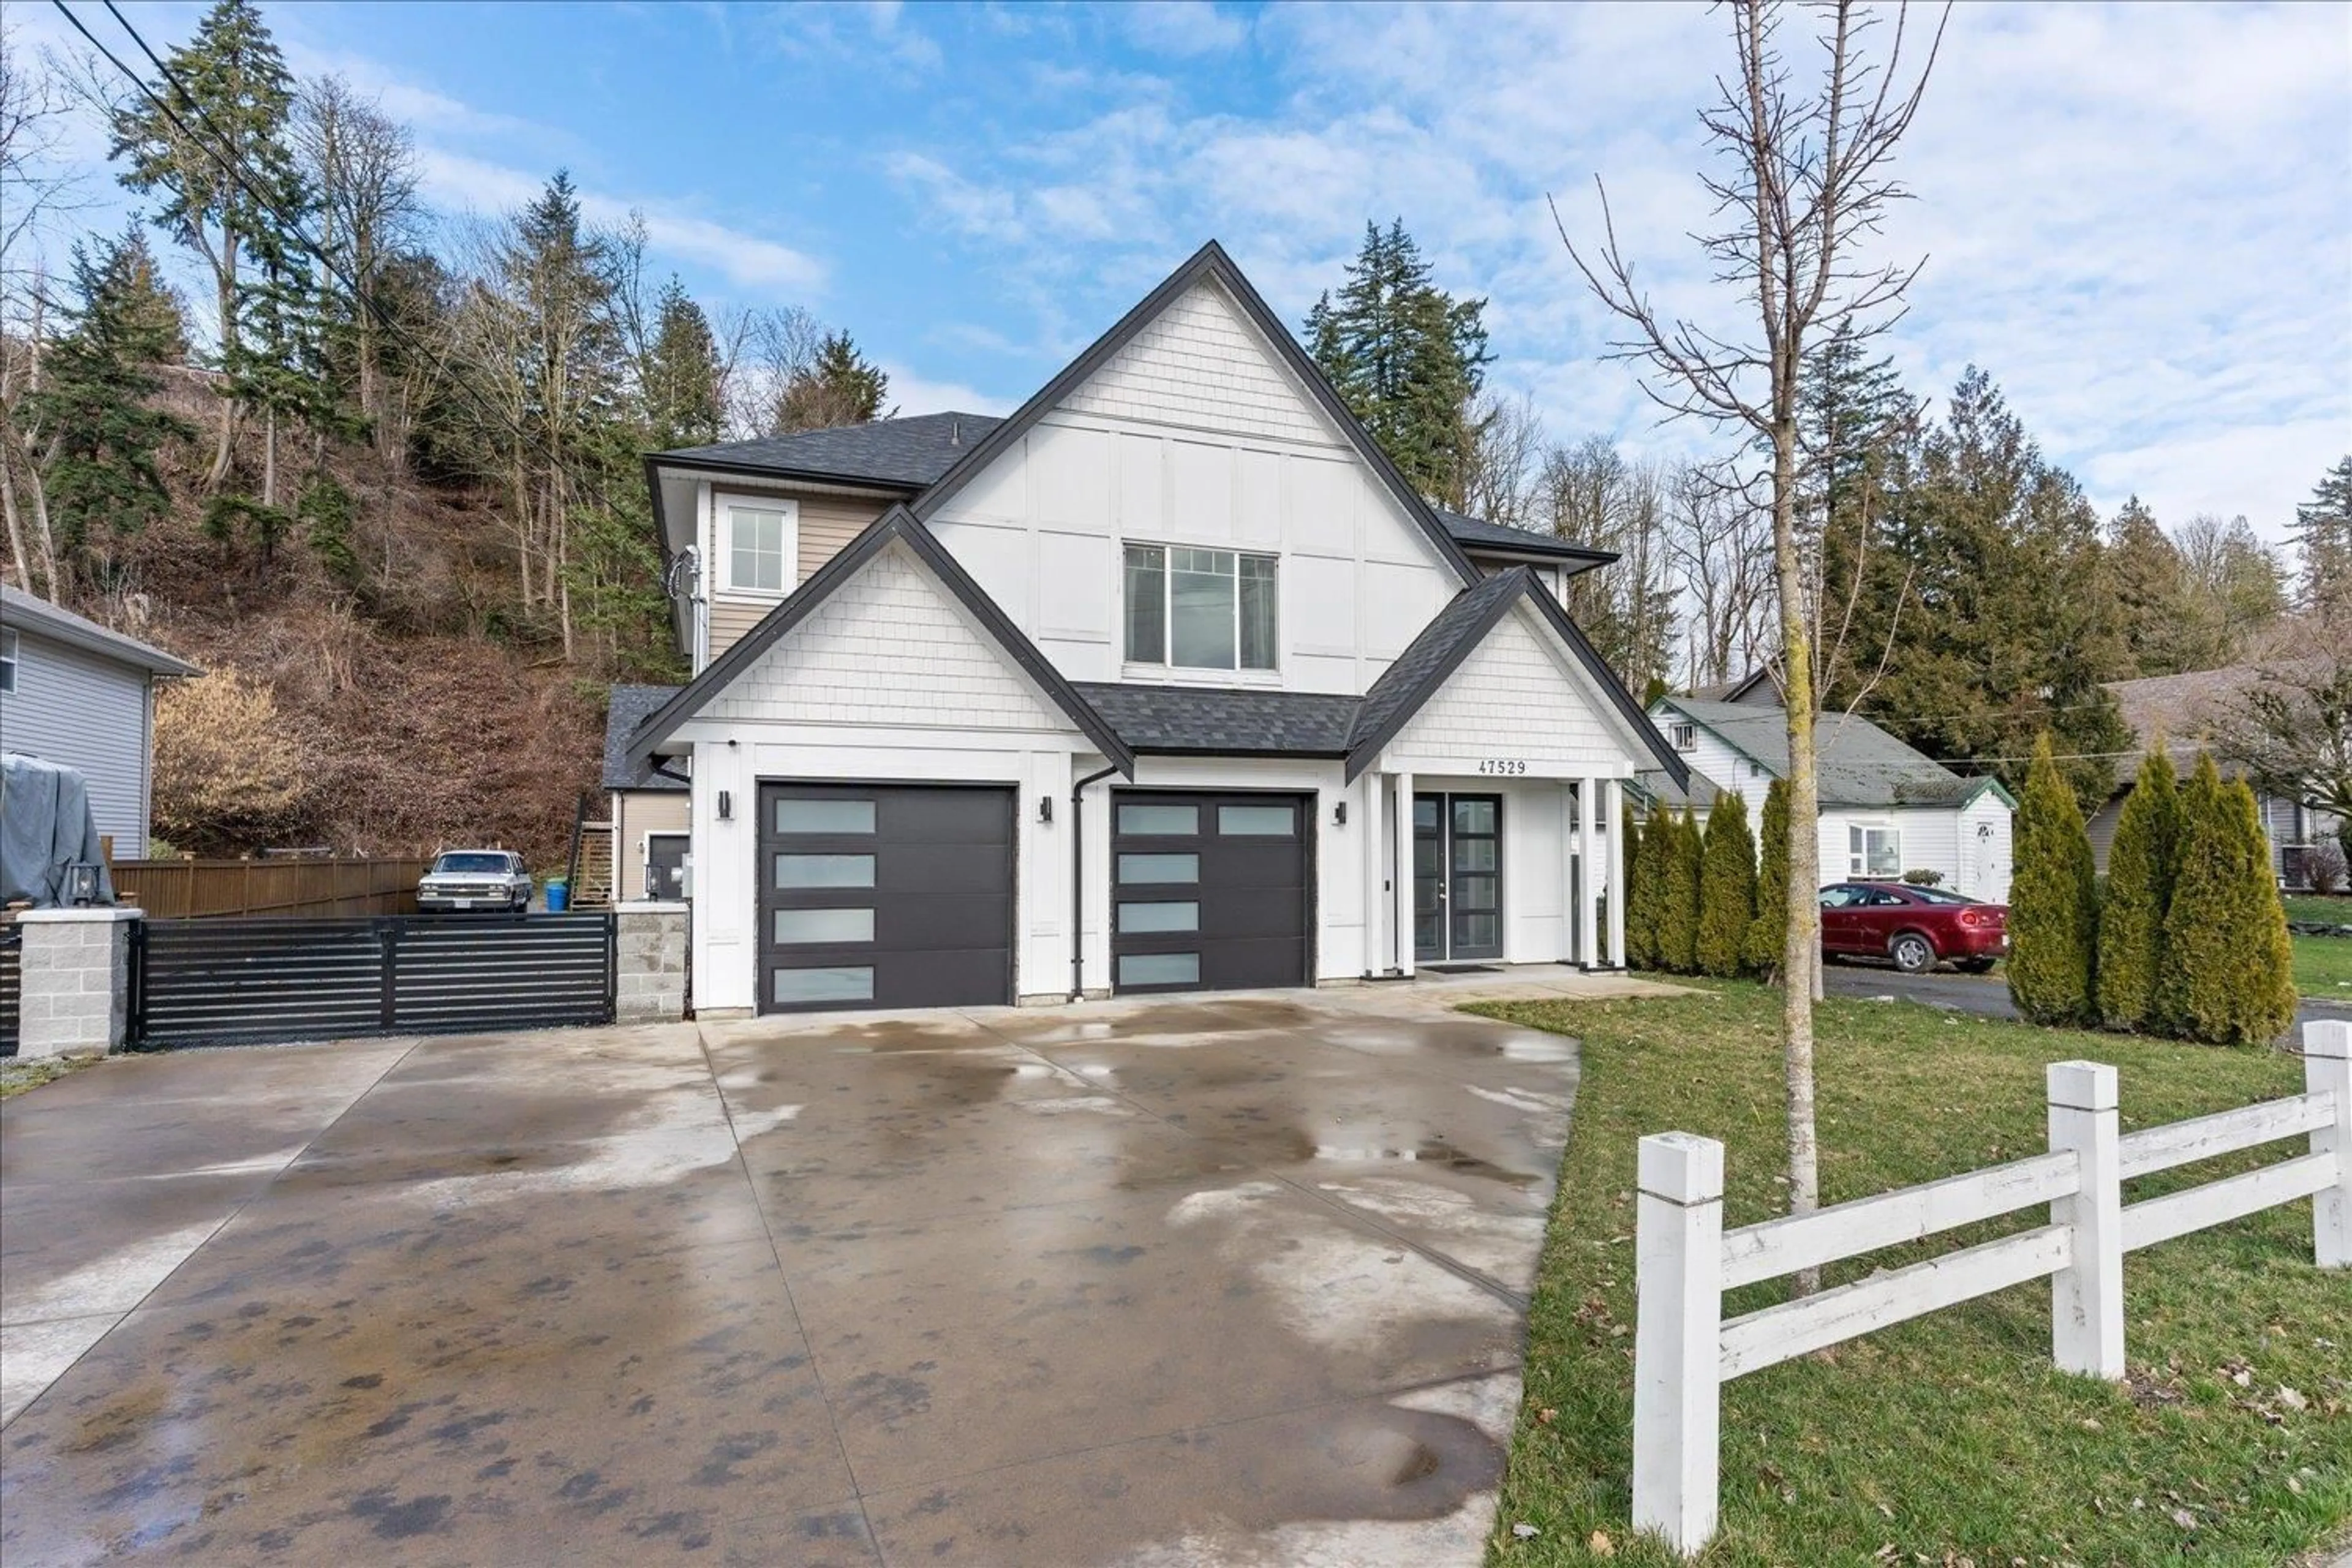 Home with vinyl exterior material for 47529 YALE ROAD, Chilliwack British Columbia V2P7M8